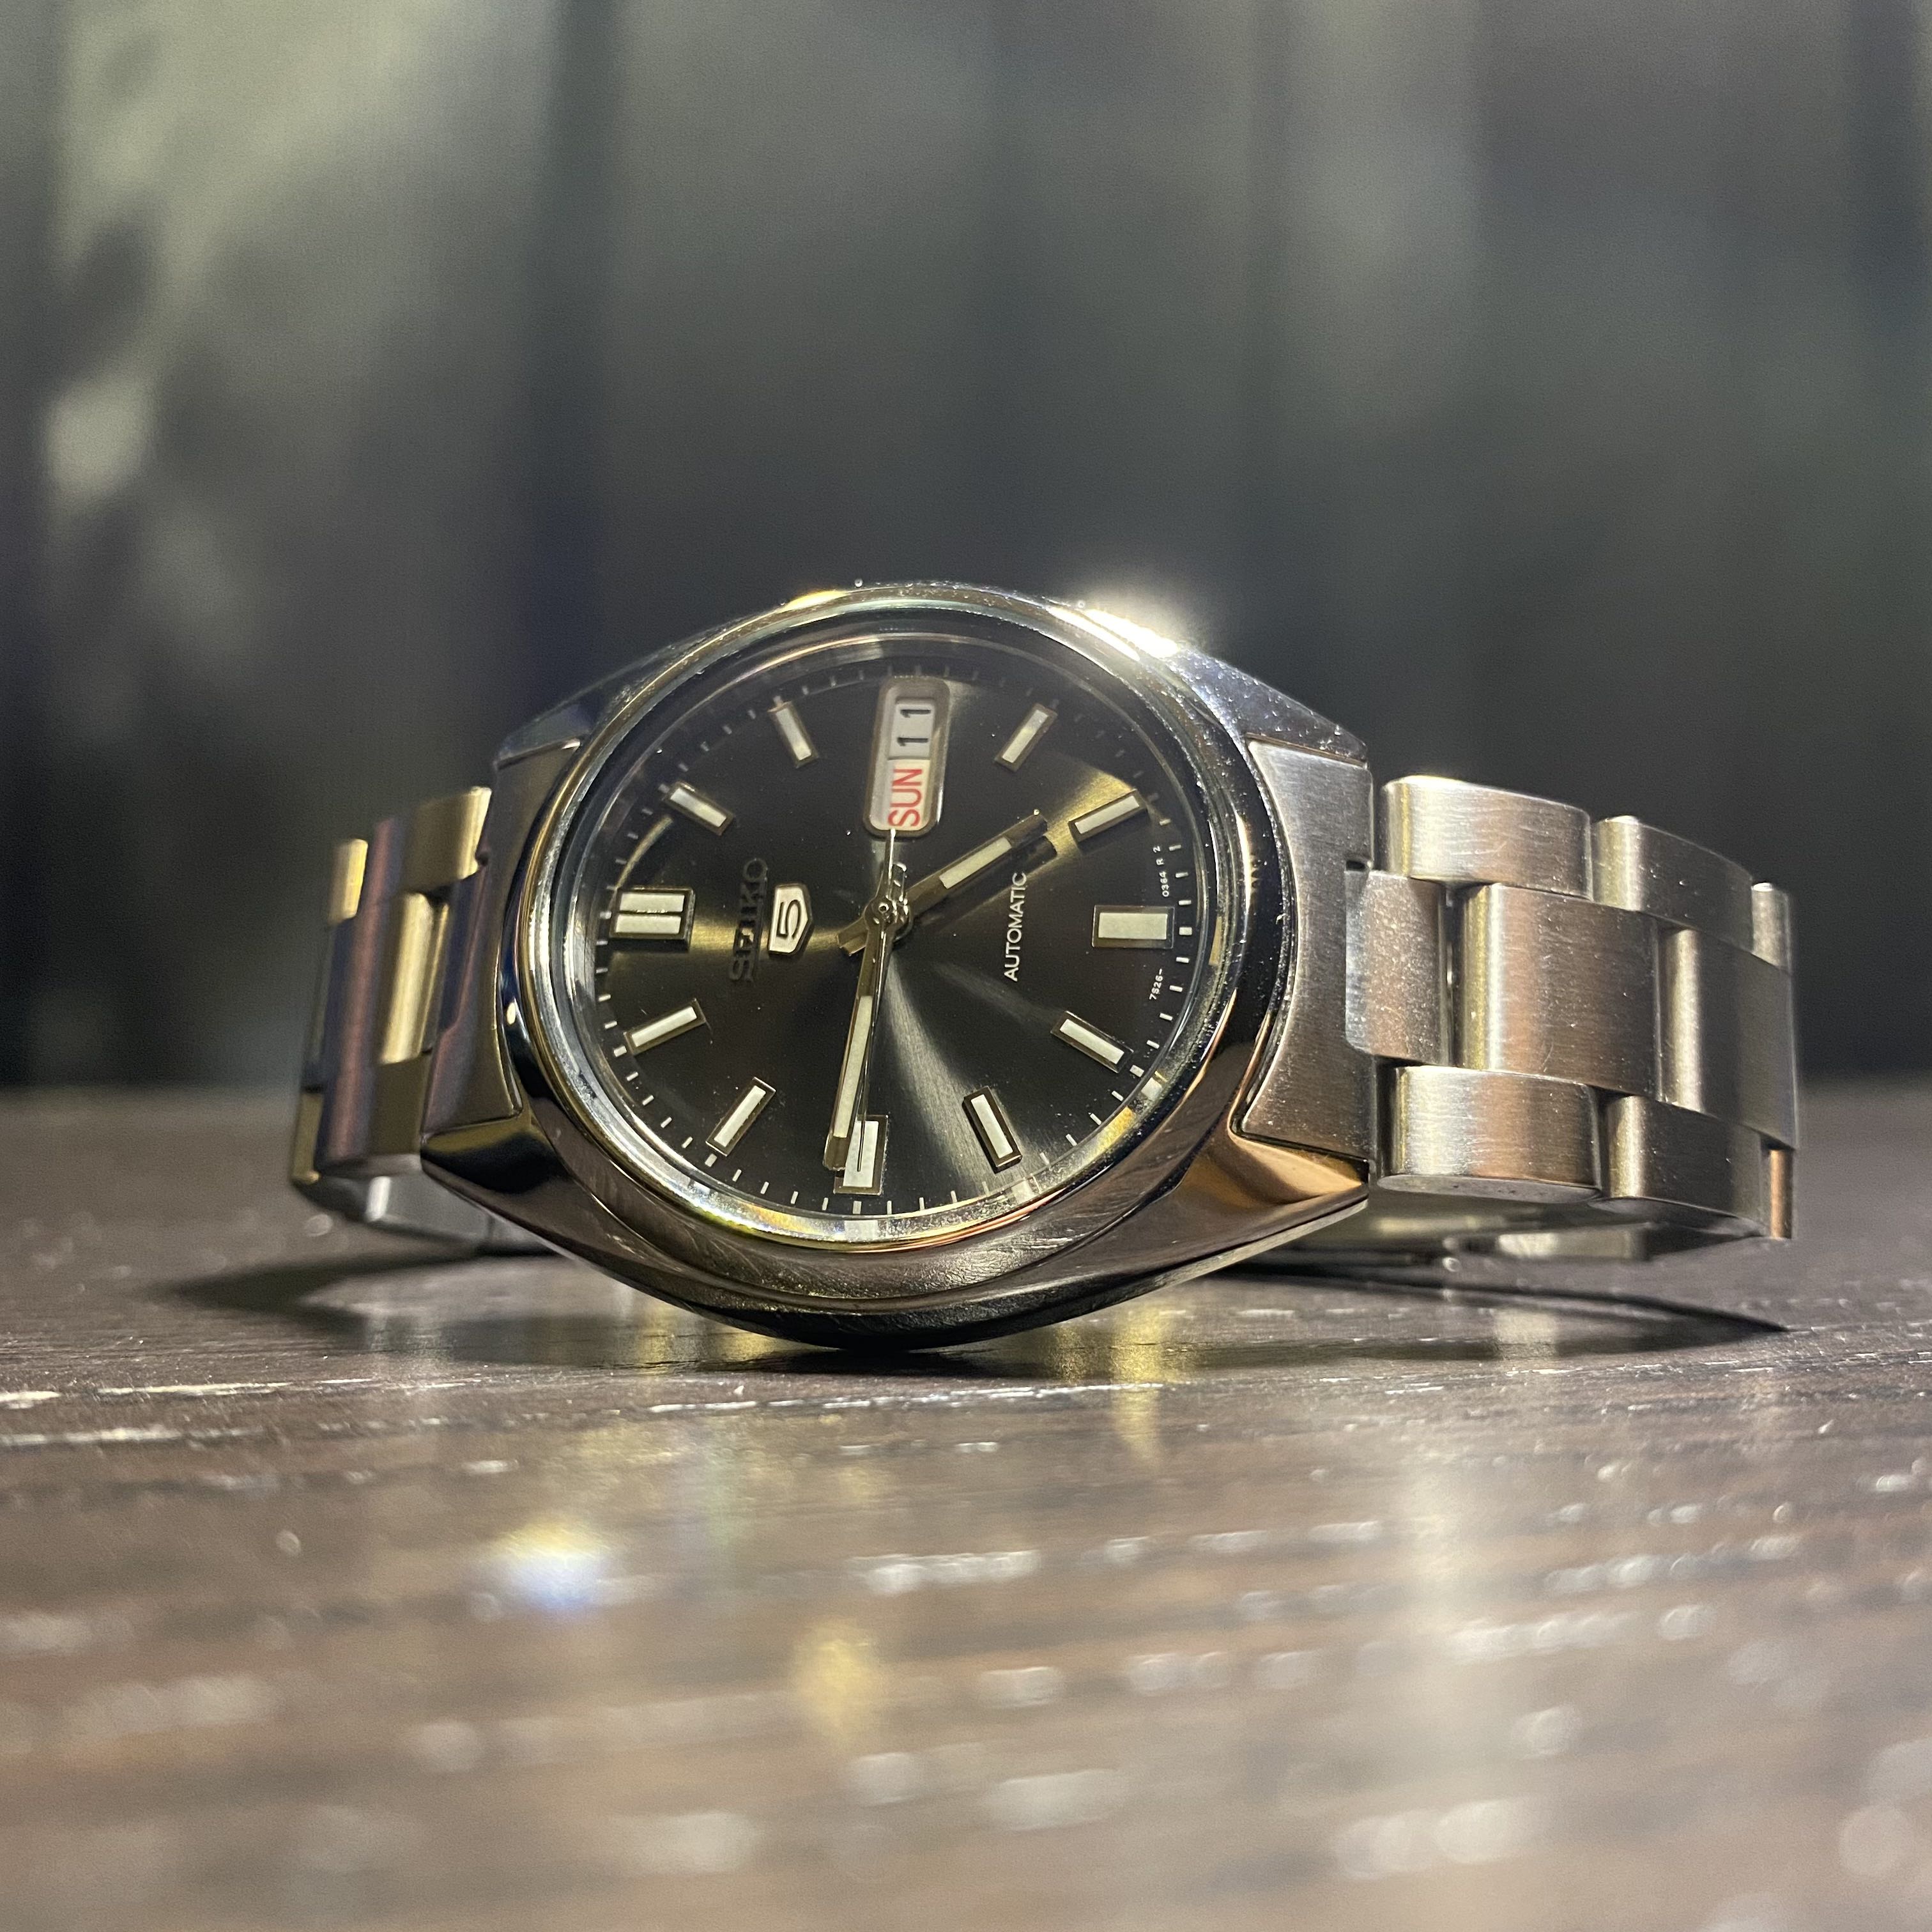 Seiko SNXS79J1] First Seiko! Upgraded the bracelet to the jubilee.  Thoughts? : r/Watches